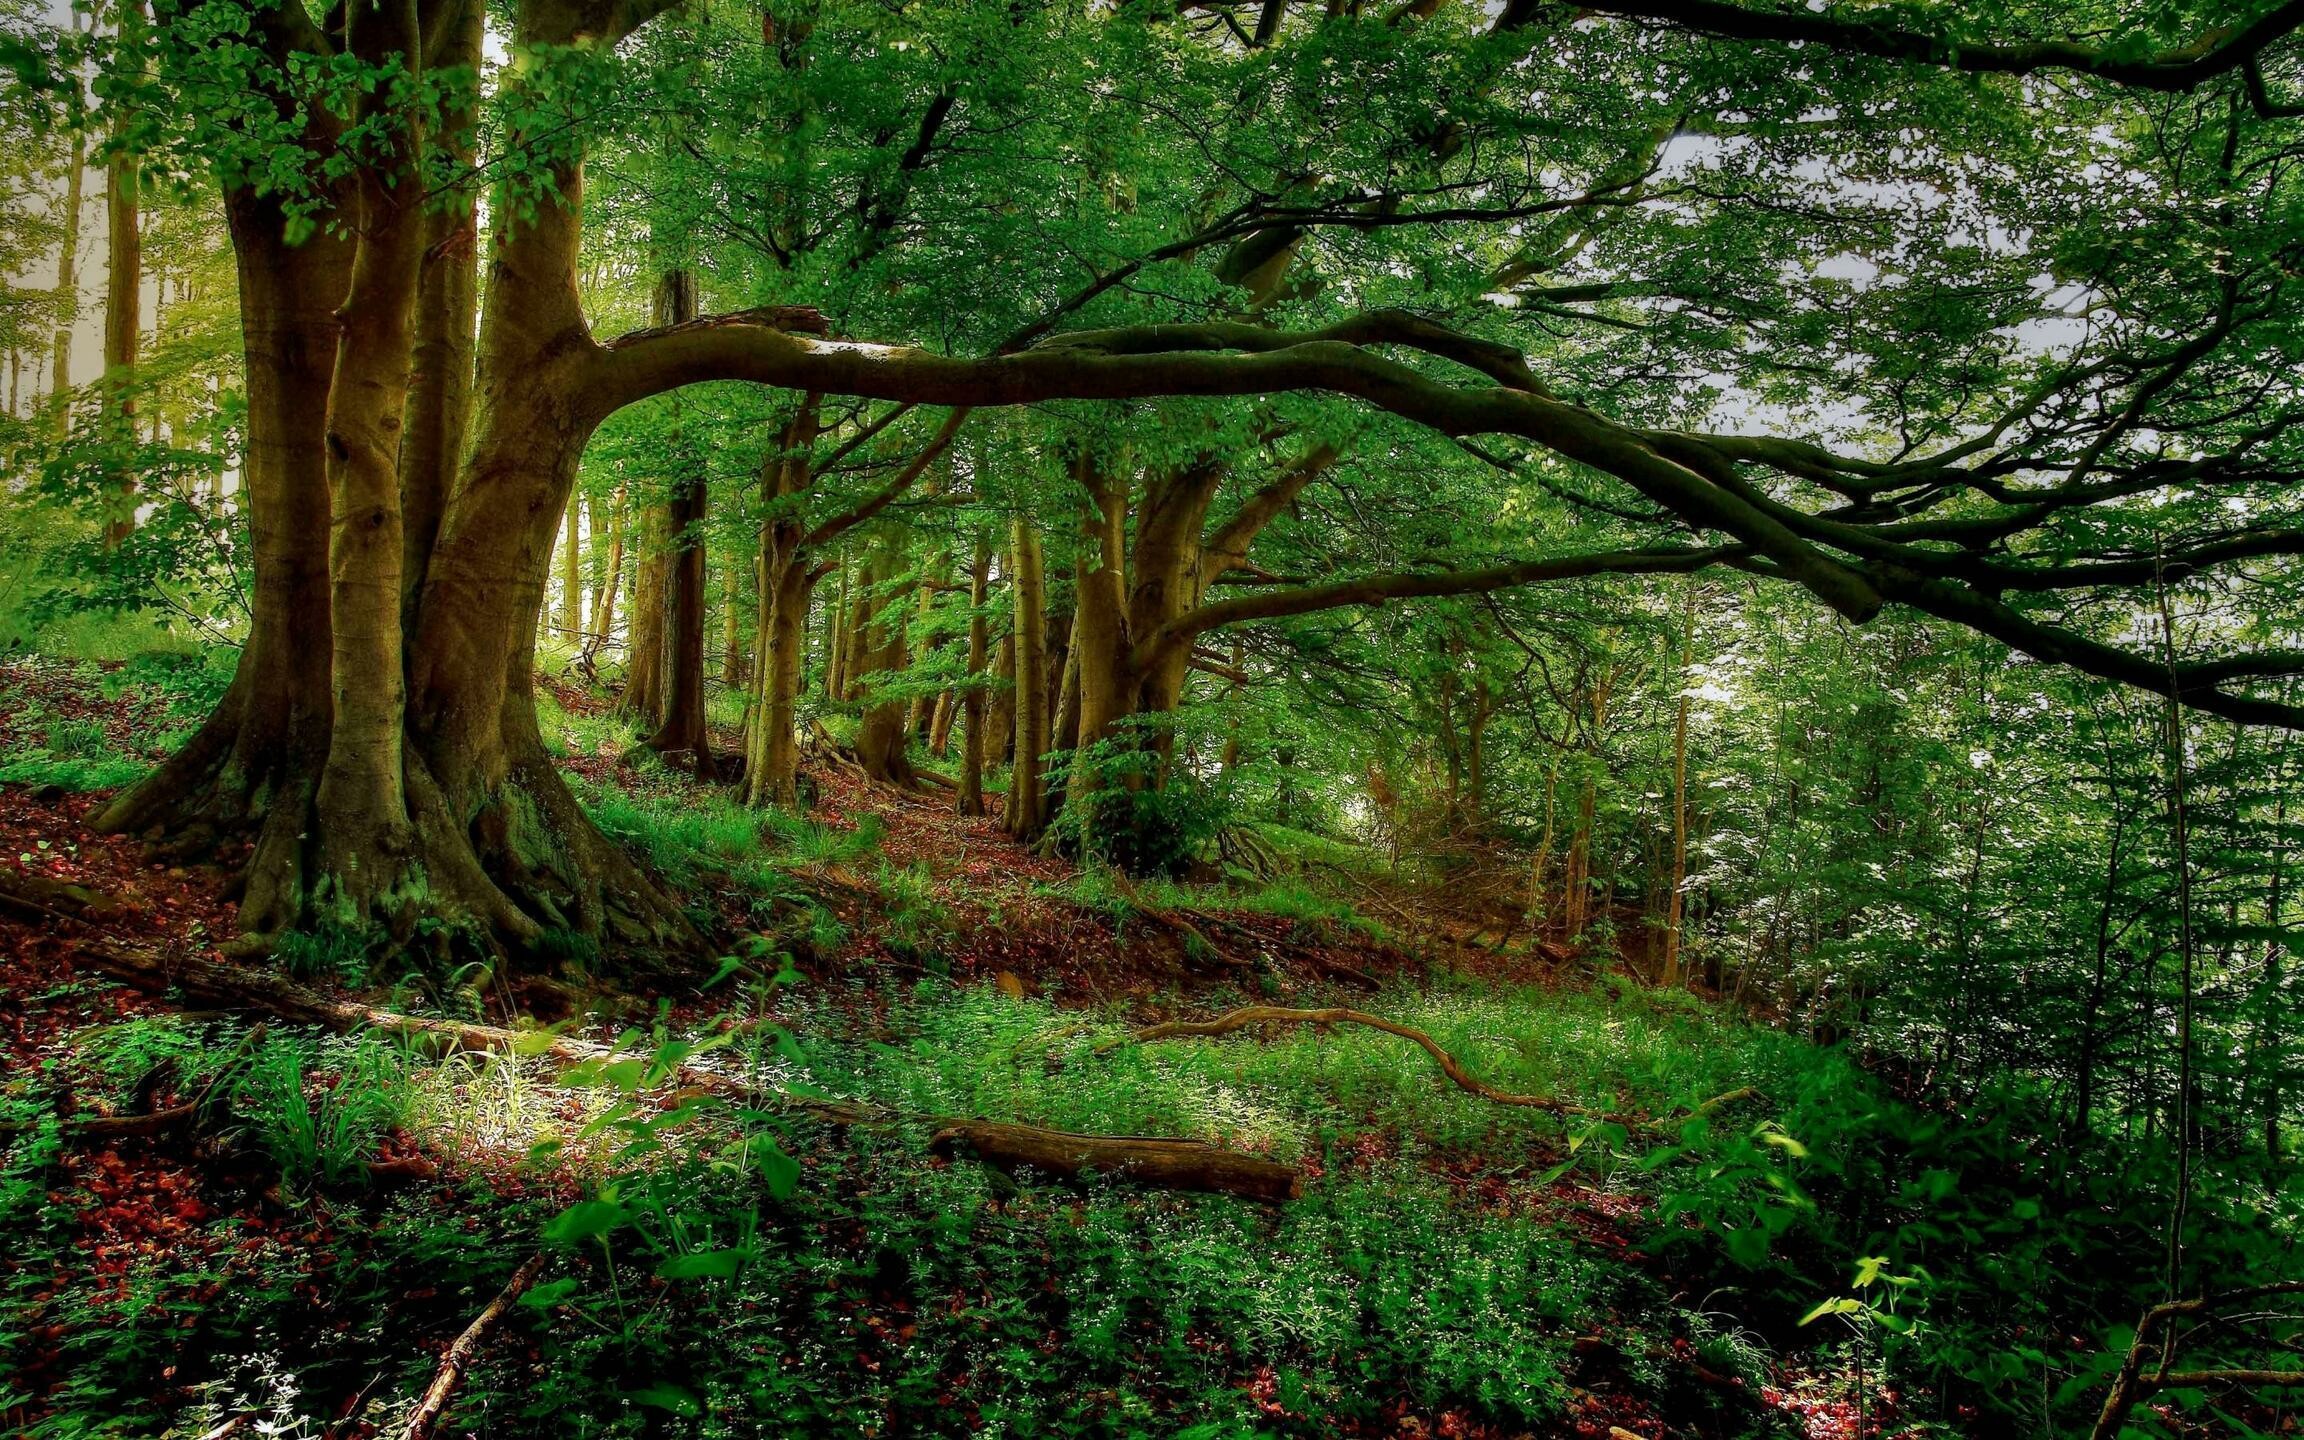 Untamed forest wilderness, Nature's untouched beauty, Ancient trees stand tall, Tranquil serenade, 2310x1440 HD Desktop